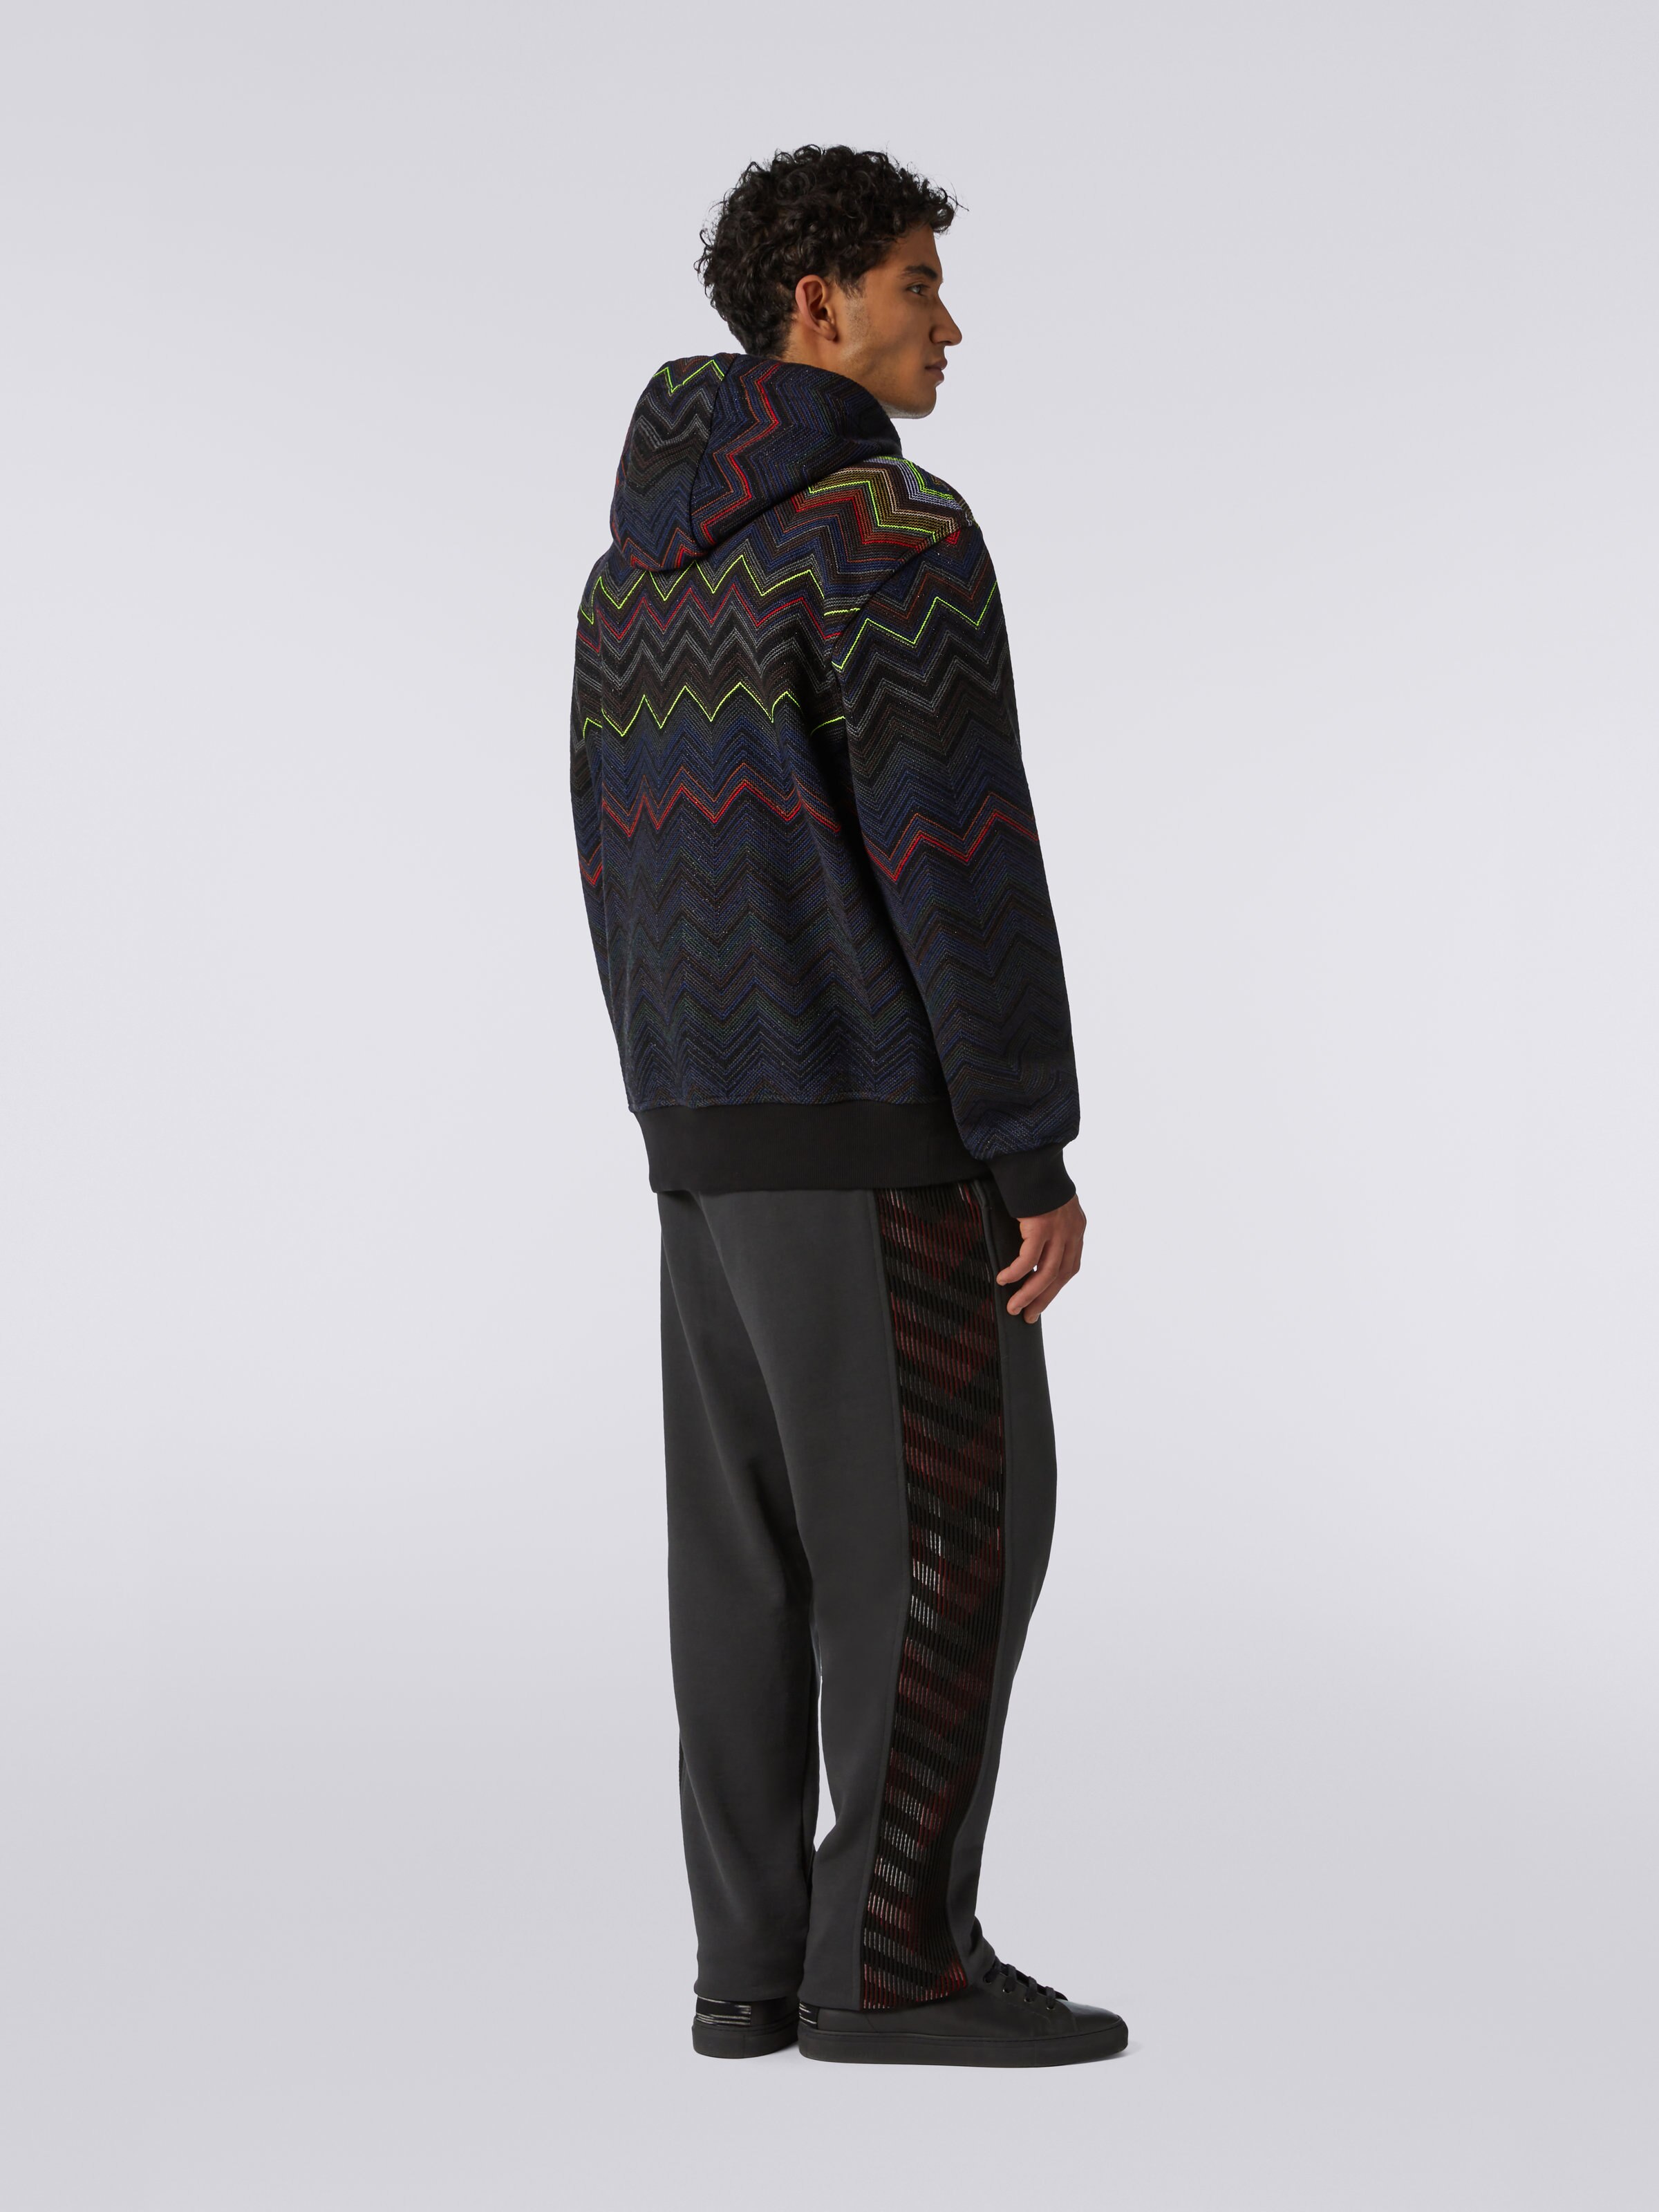 Hoodie with pouch pocket in collaboration with Mike Maignan, Multicoloured - 3